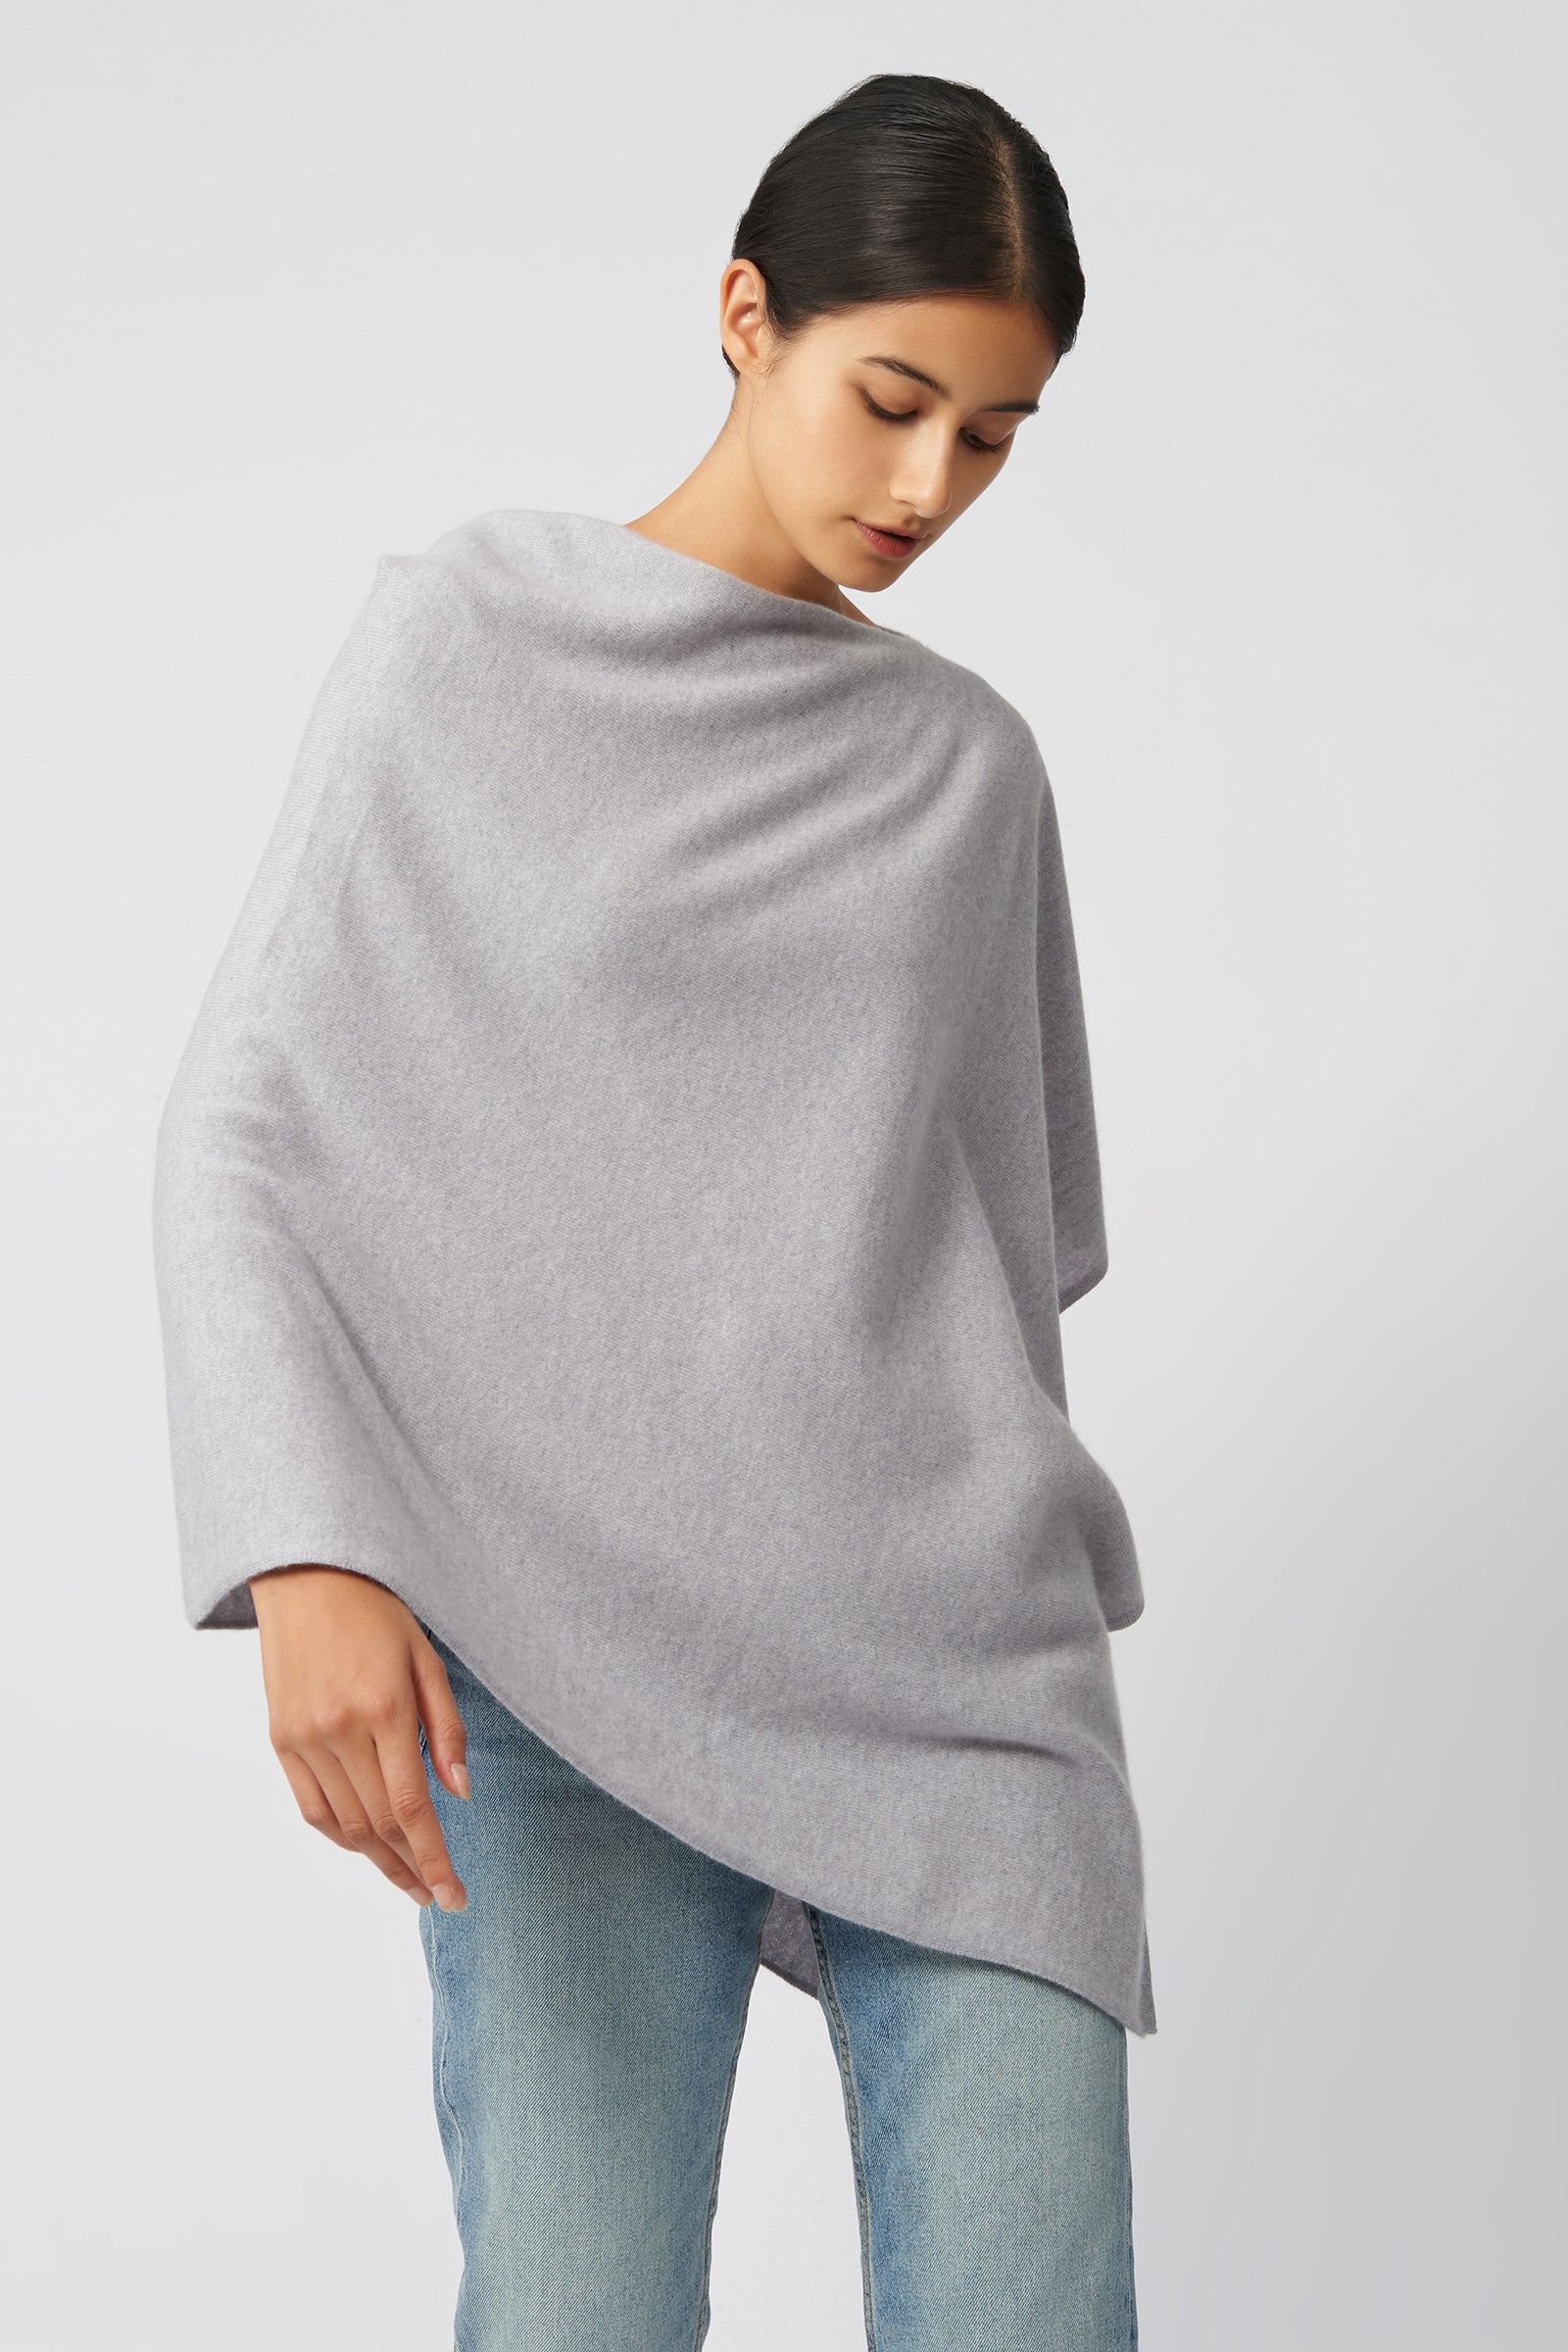 Kal Rieman Cashmere Poncho in Grey Heather on Model Side View